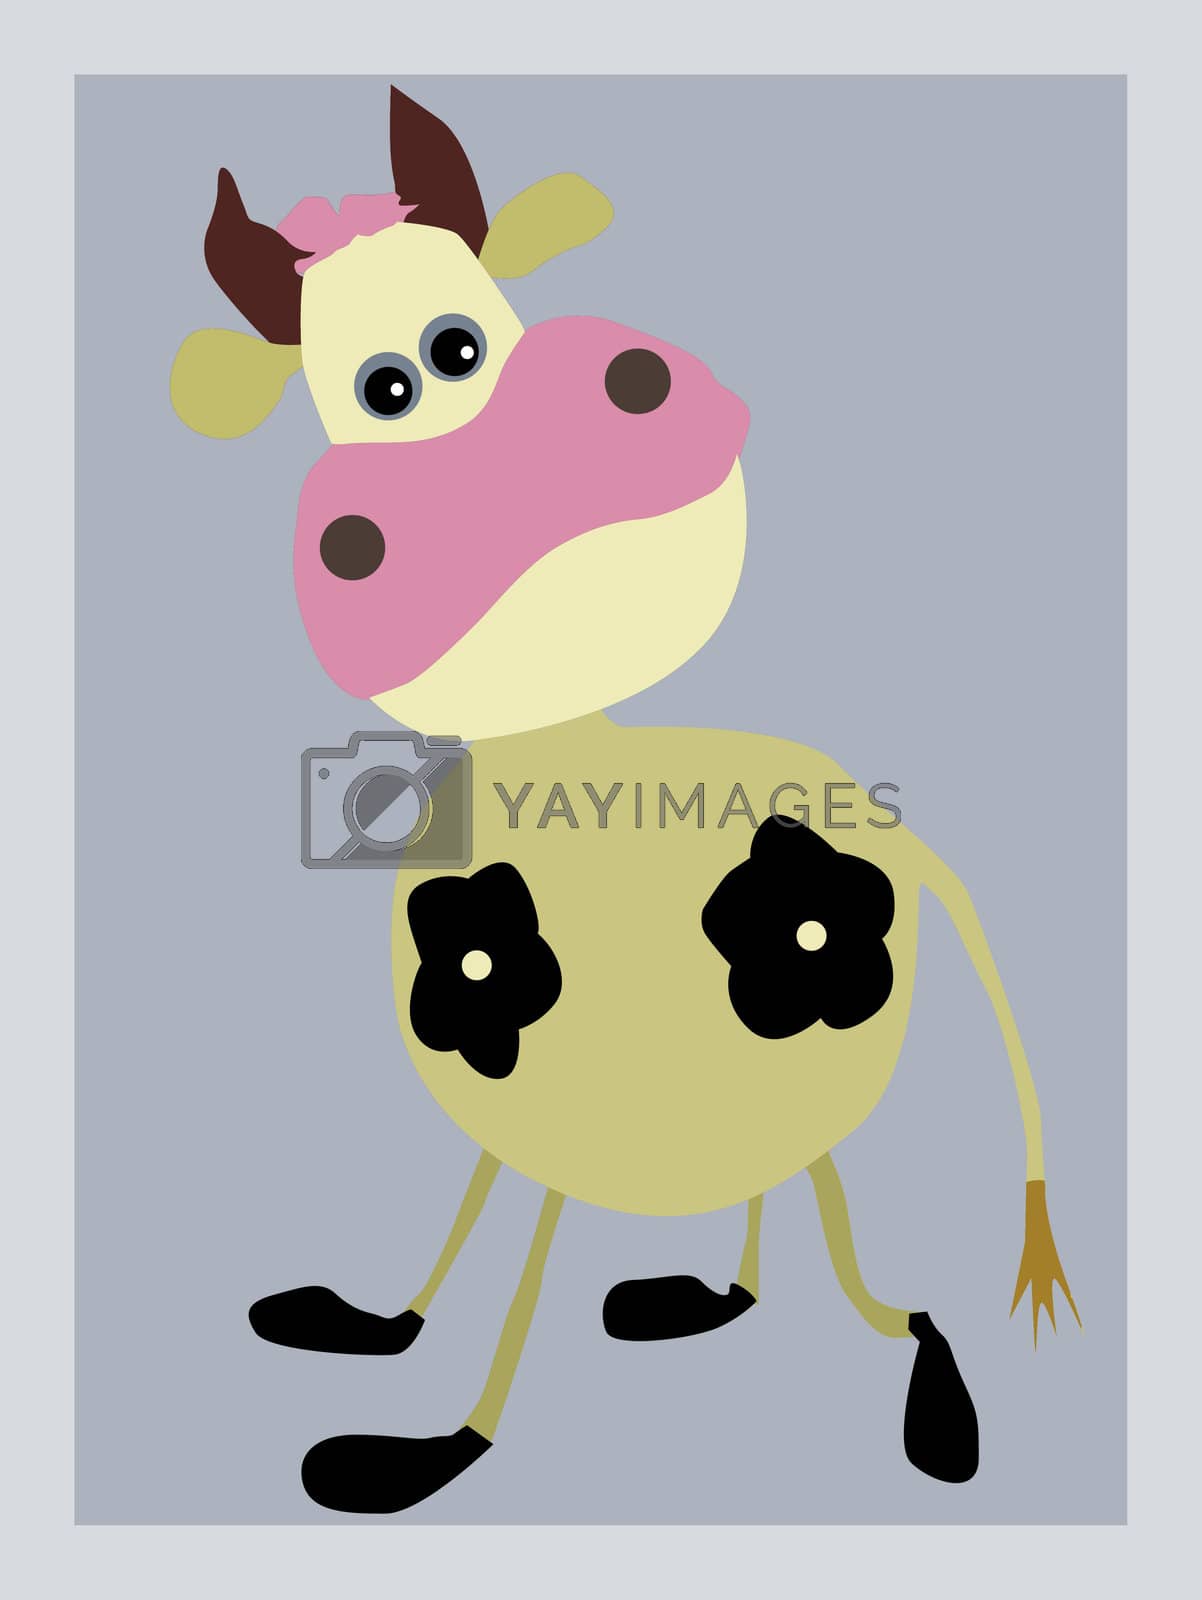 Royalty free image of vector portrait of the cow on gray background by basel101658